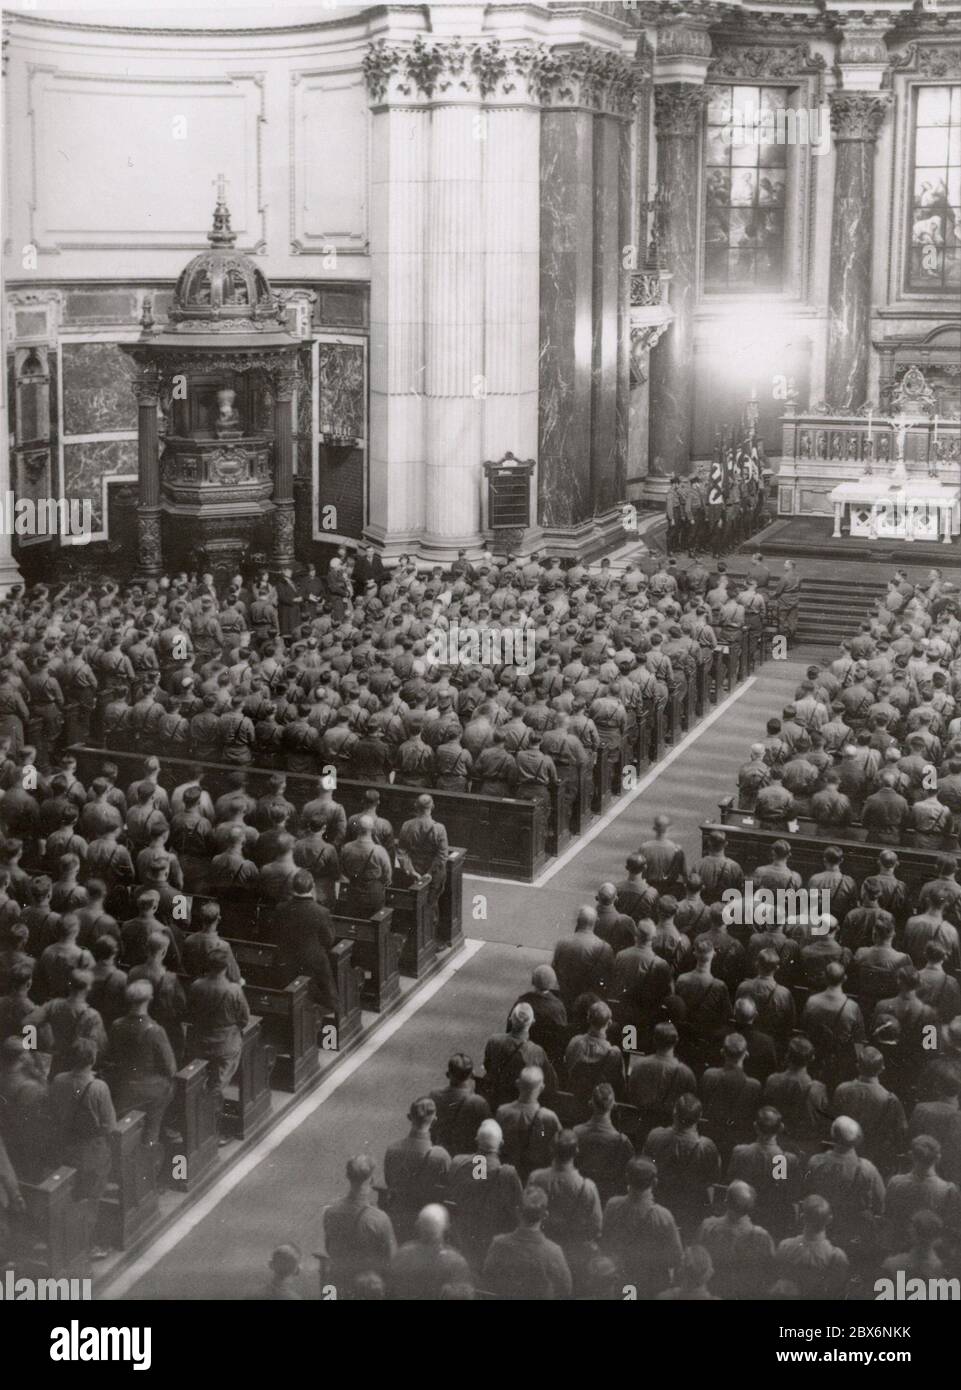 SA service in the Berlin Cathedral - Dr. Goebbels and Prince Aug. Wilhelm leaving the Rirche. Heinrich Hoffmann Photographs 1933 Adolf Hitler's official photographer, and a Nazi politician and publisher, who was a member of Hitler's intimate circle. Stock Photo